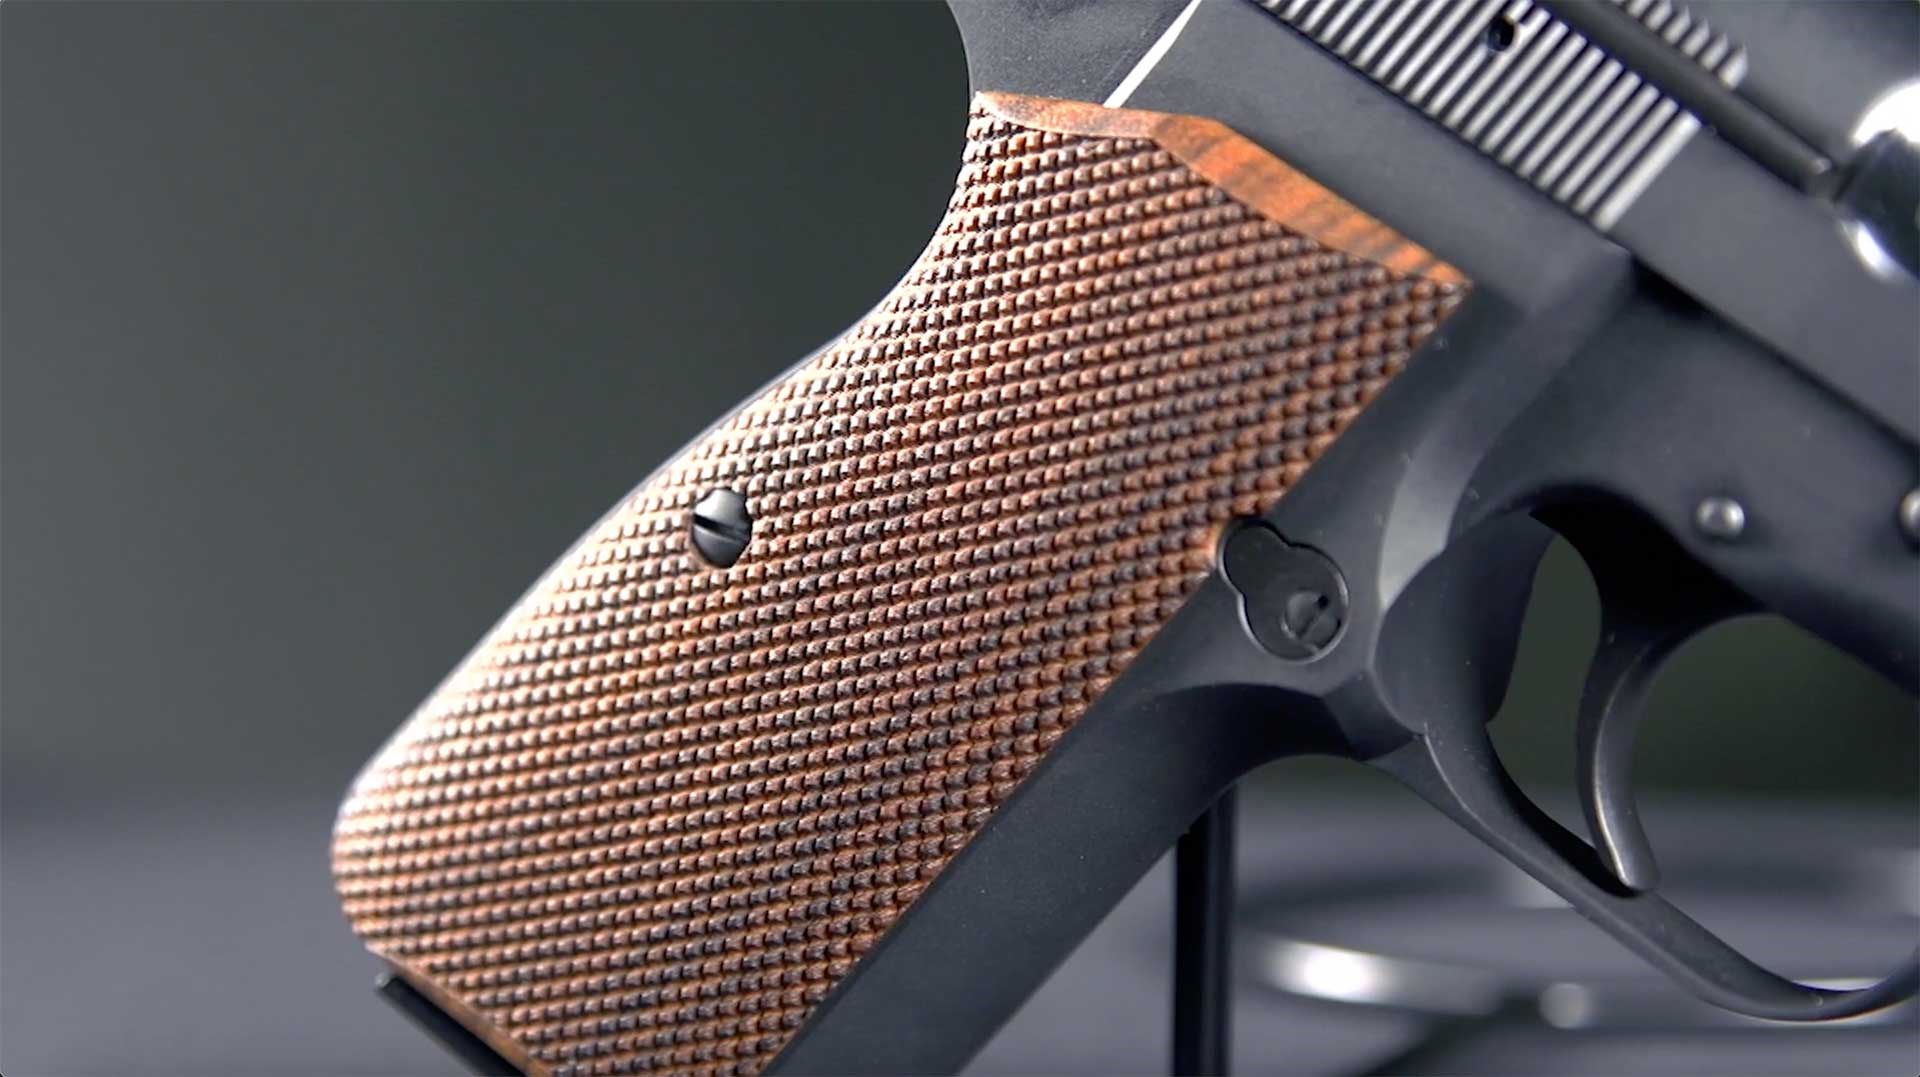 Right-side walnut grip panel on the Springfield Armory SA-35.